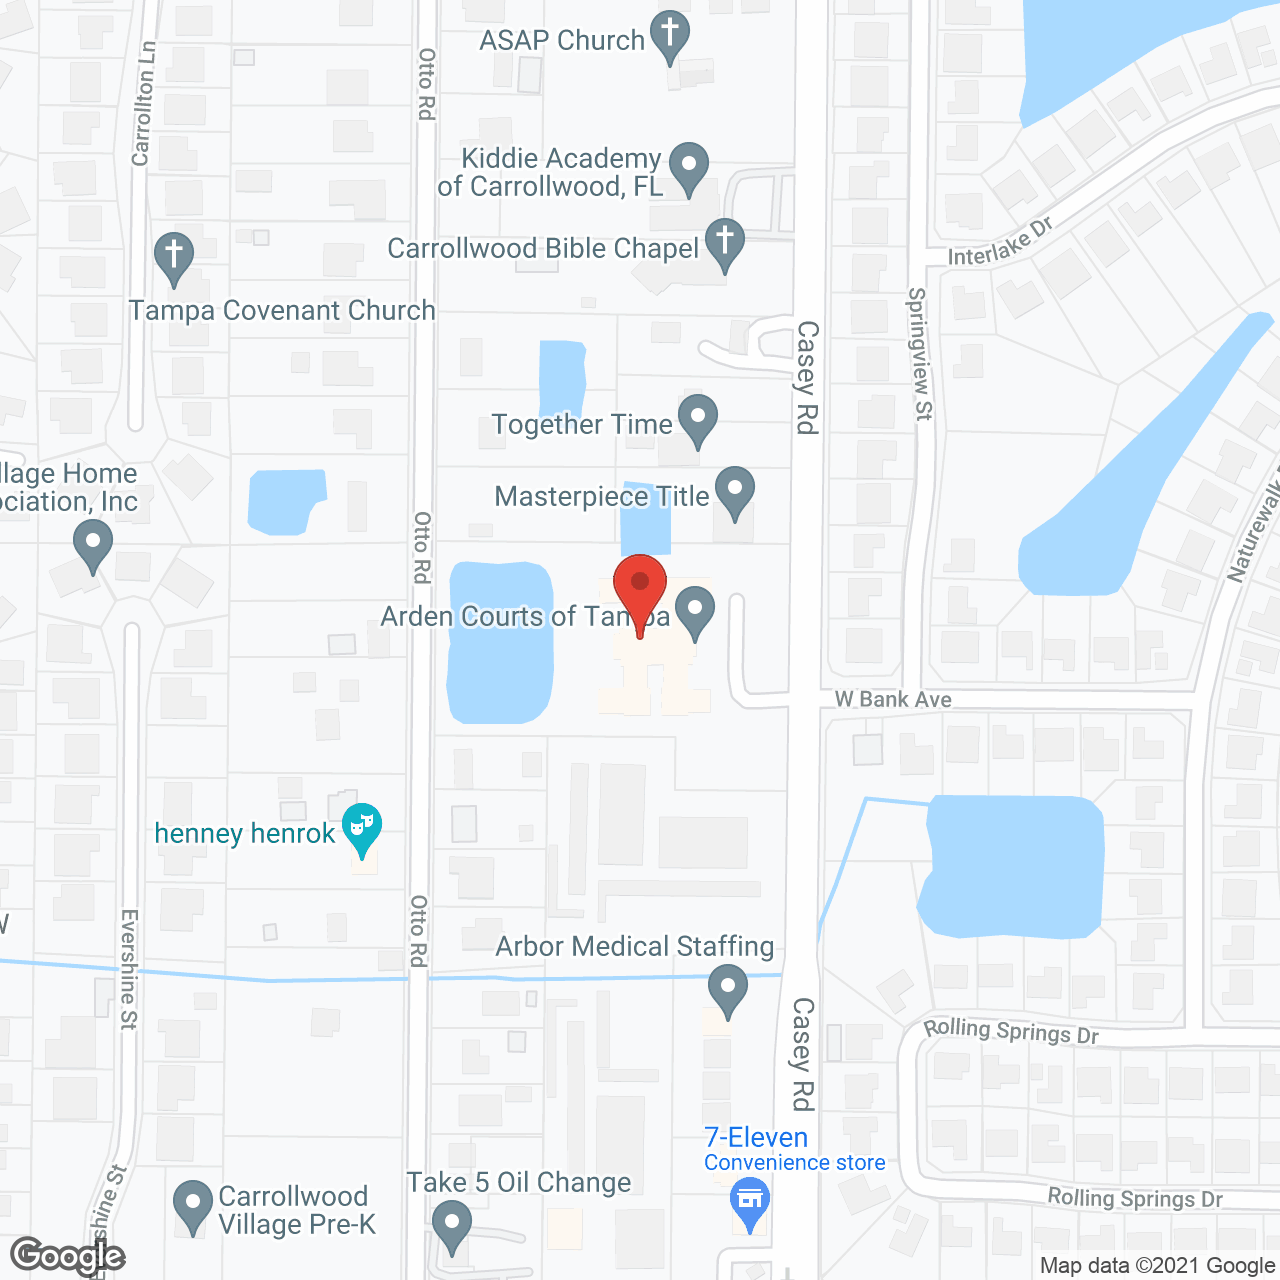 Arden Courts of Tampa in google map